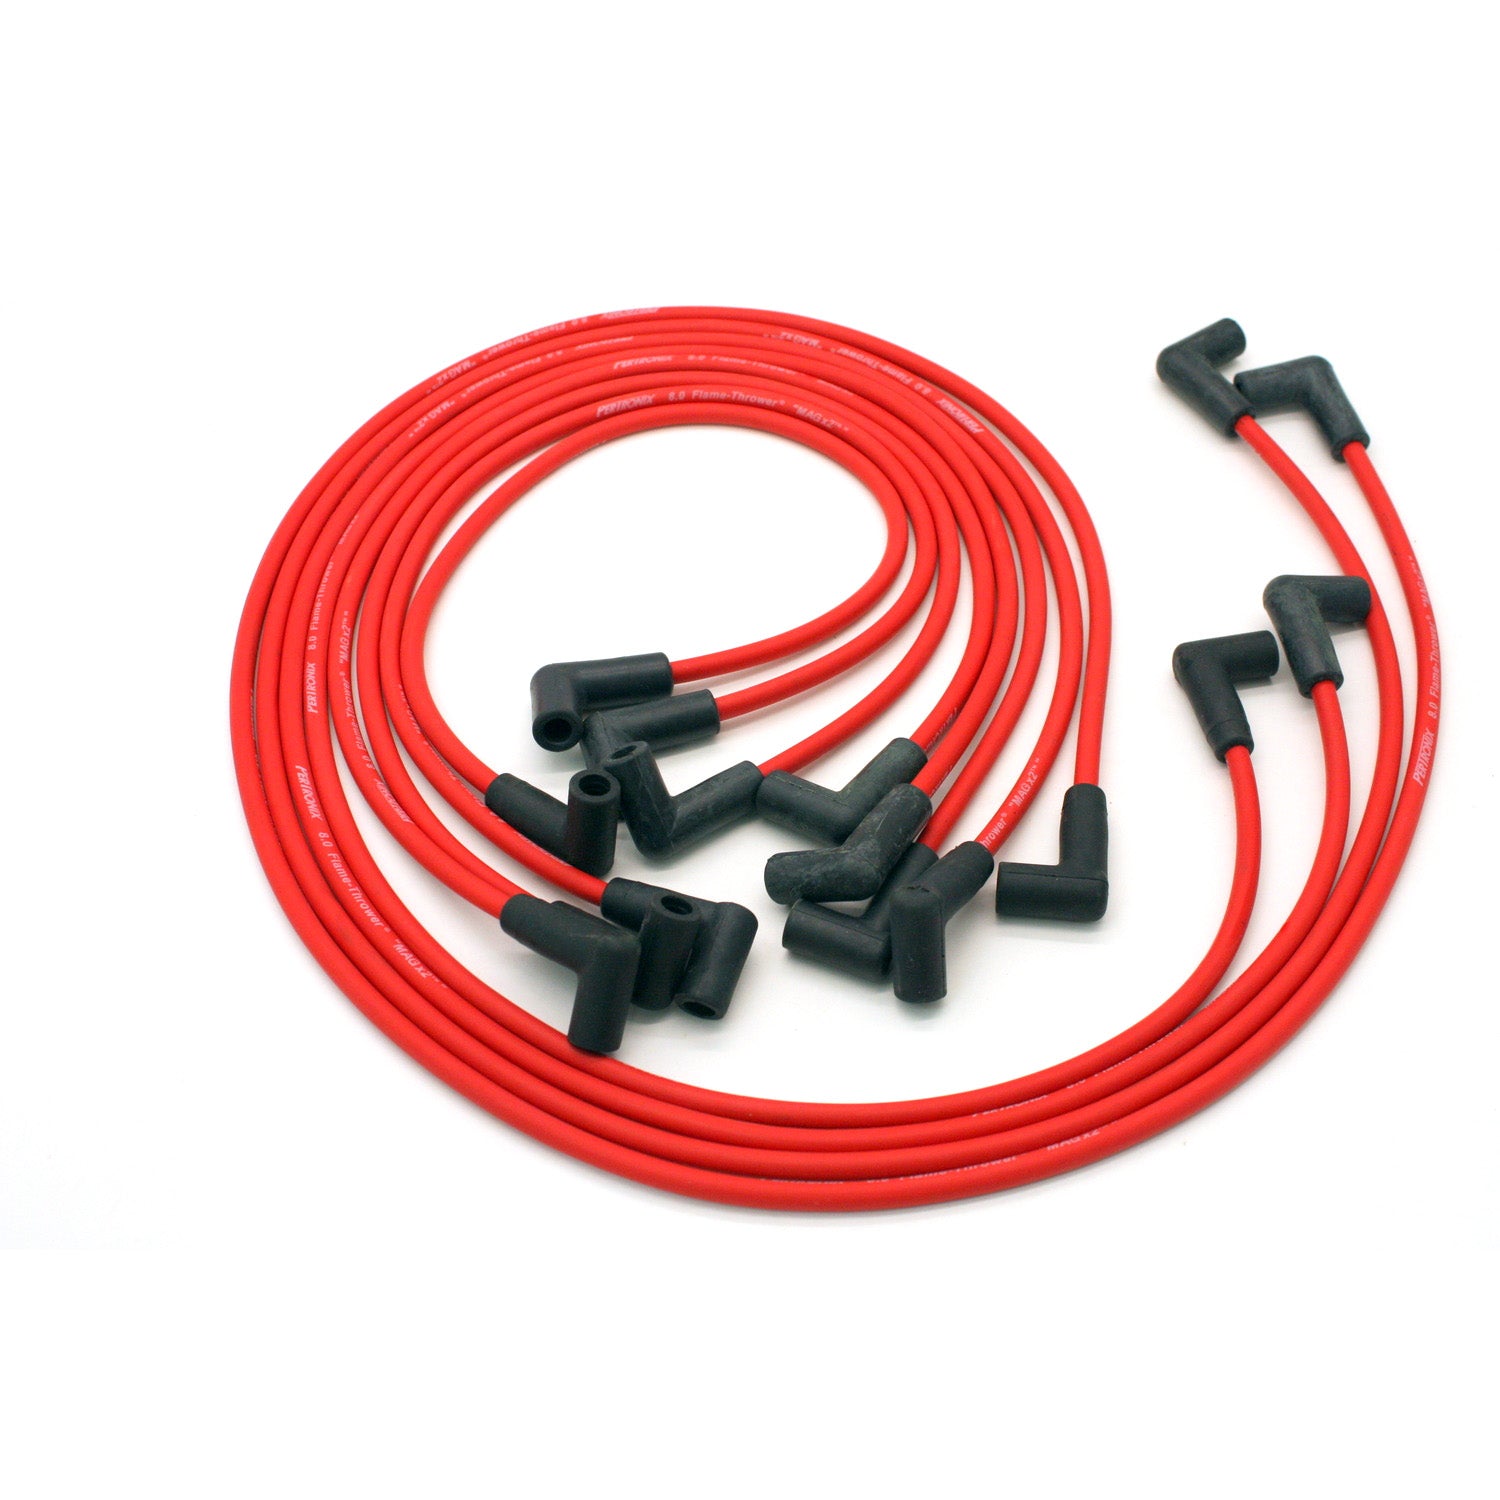 PerTronix 808419 Flame-Thrower Spark Plug Wires 8 cyl 8mm 74-82 Corvette HEI Custom Fit Red